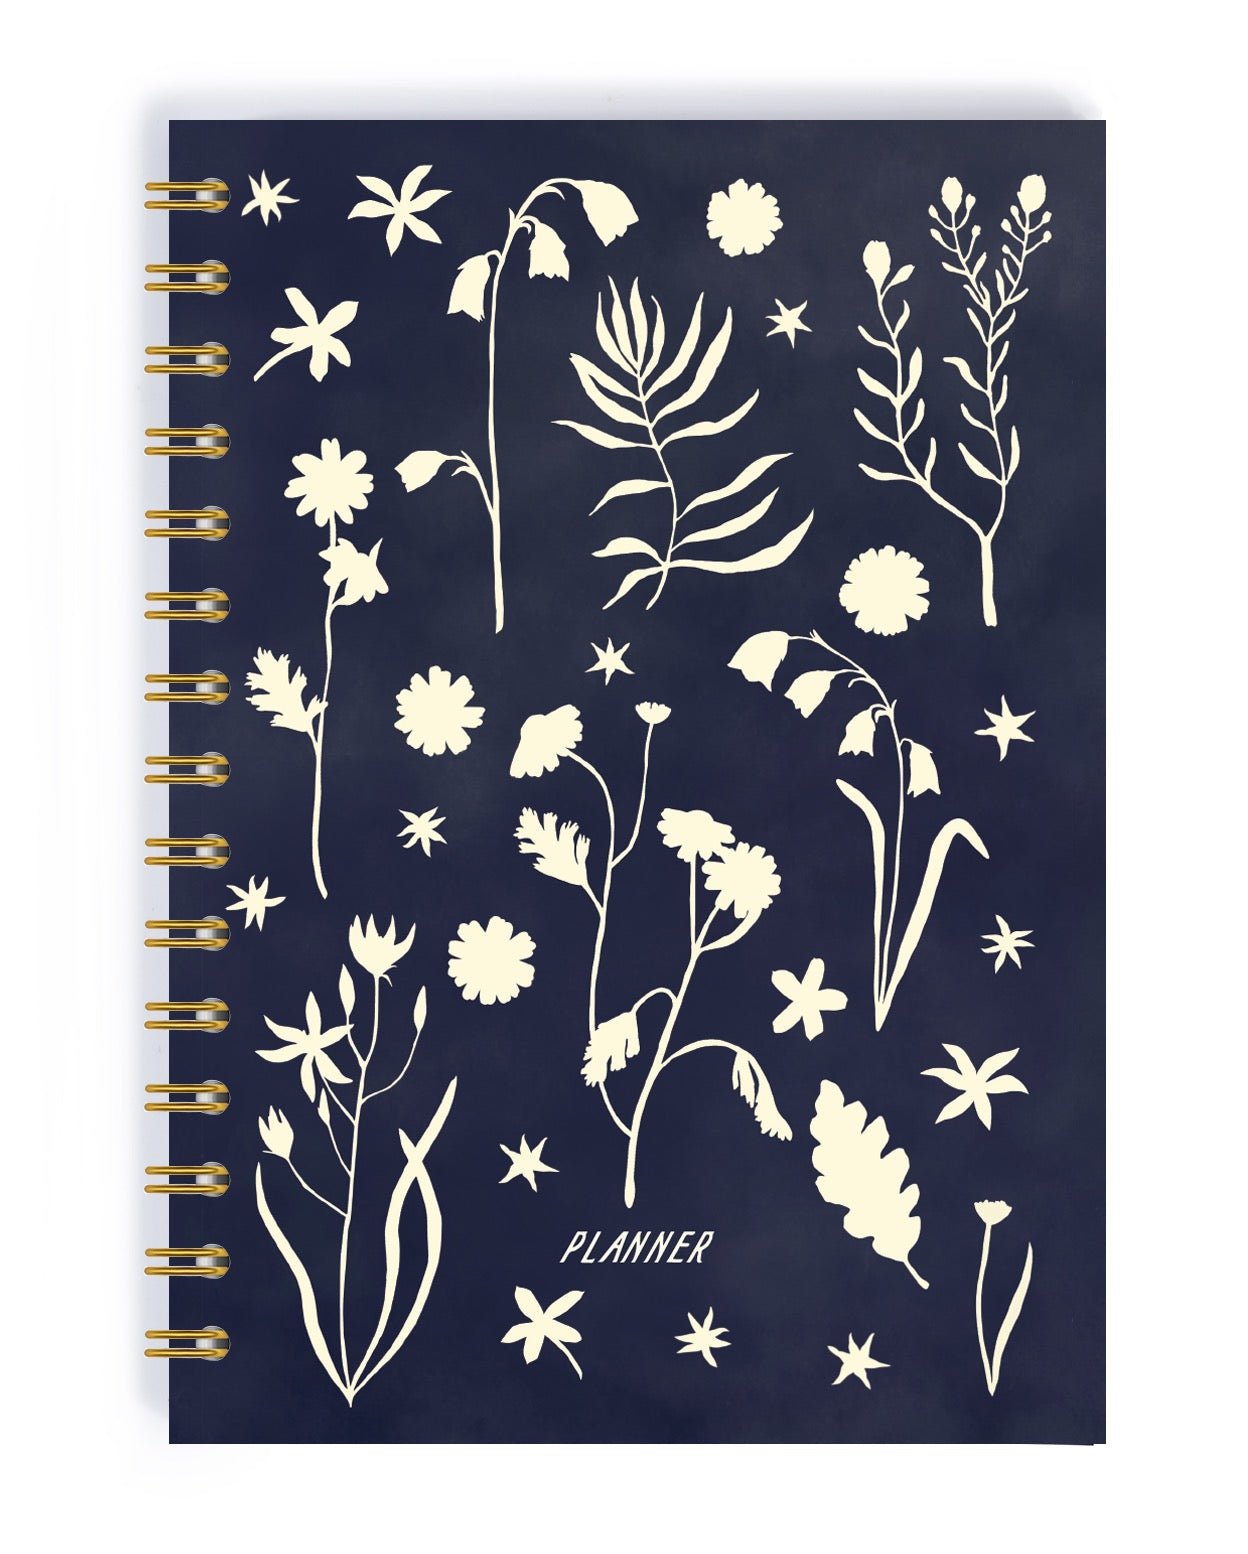 A photo of a notebook cover with cream flower and leaf outlines on a navy blue background with the words &quot;planner&quot; in caps-lock text at the bottom. 